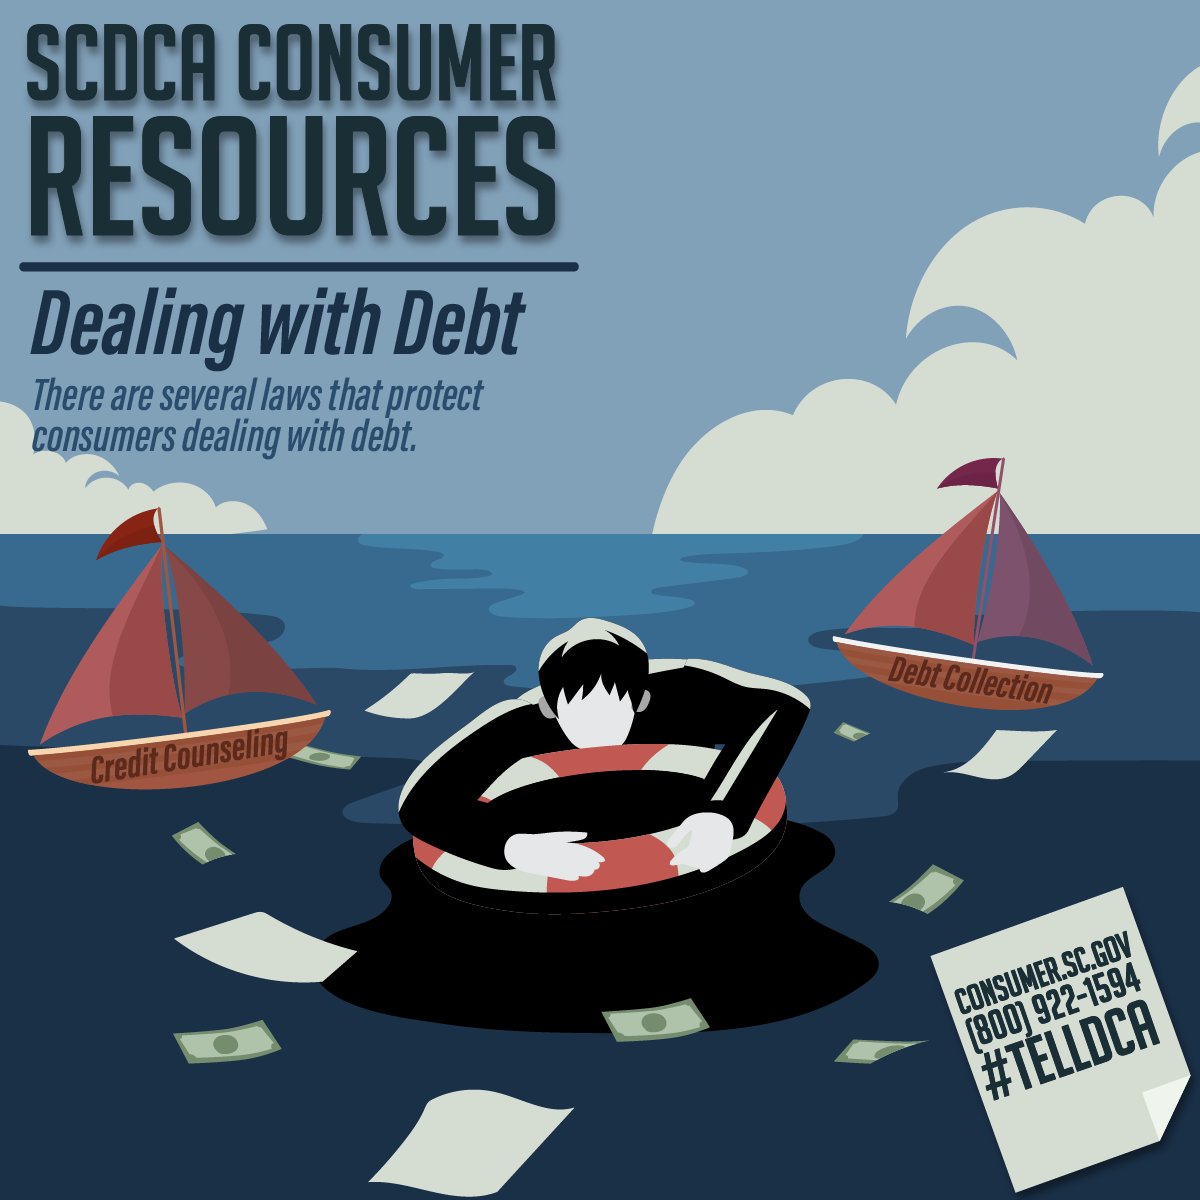 #SCDCA has plenty of resources for consumers. You can find information on debt collection and credit counseling here: consumer.sc.gov/consumer-resou…

#TellDCA #DealingWithDebt #Debt #ConsumerProtection #ConsumerAffairs